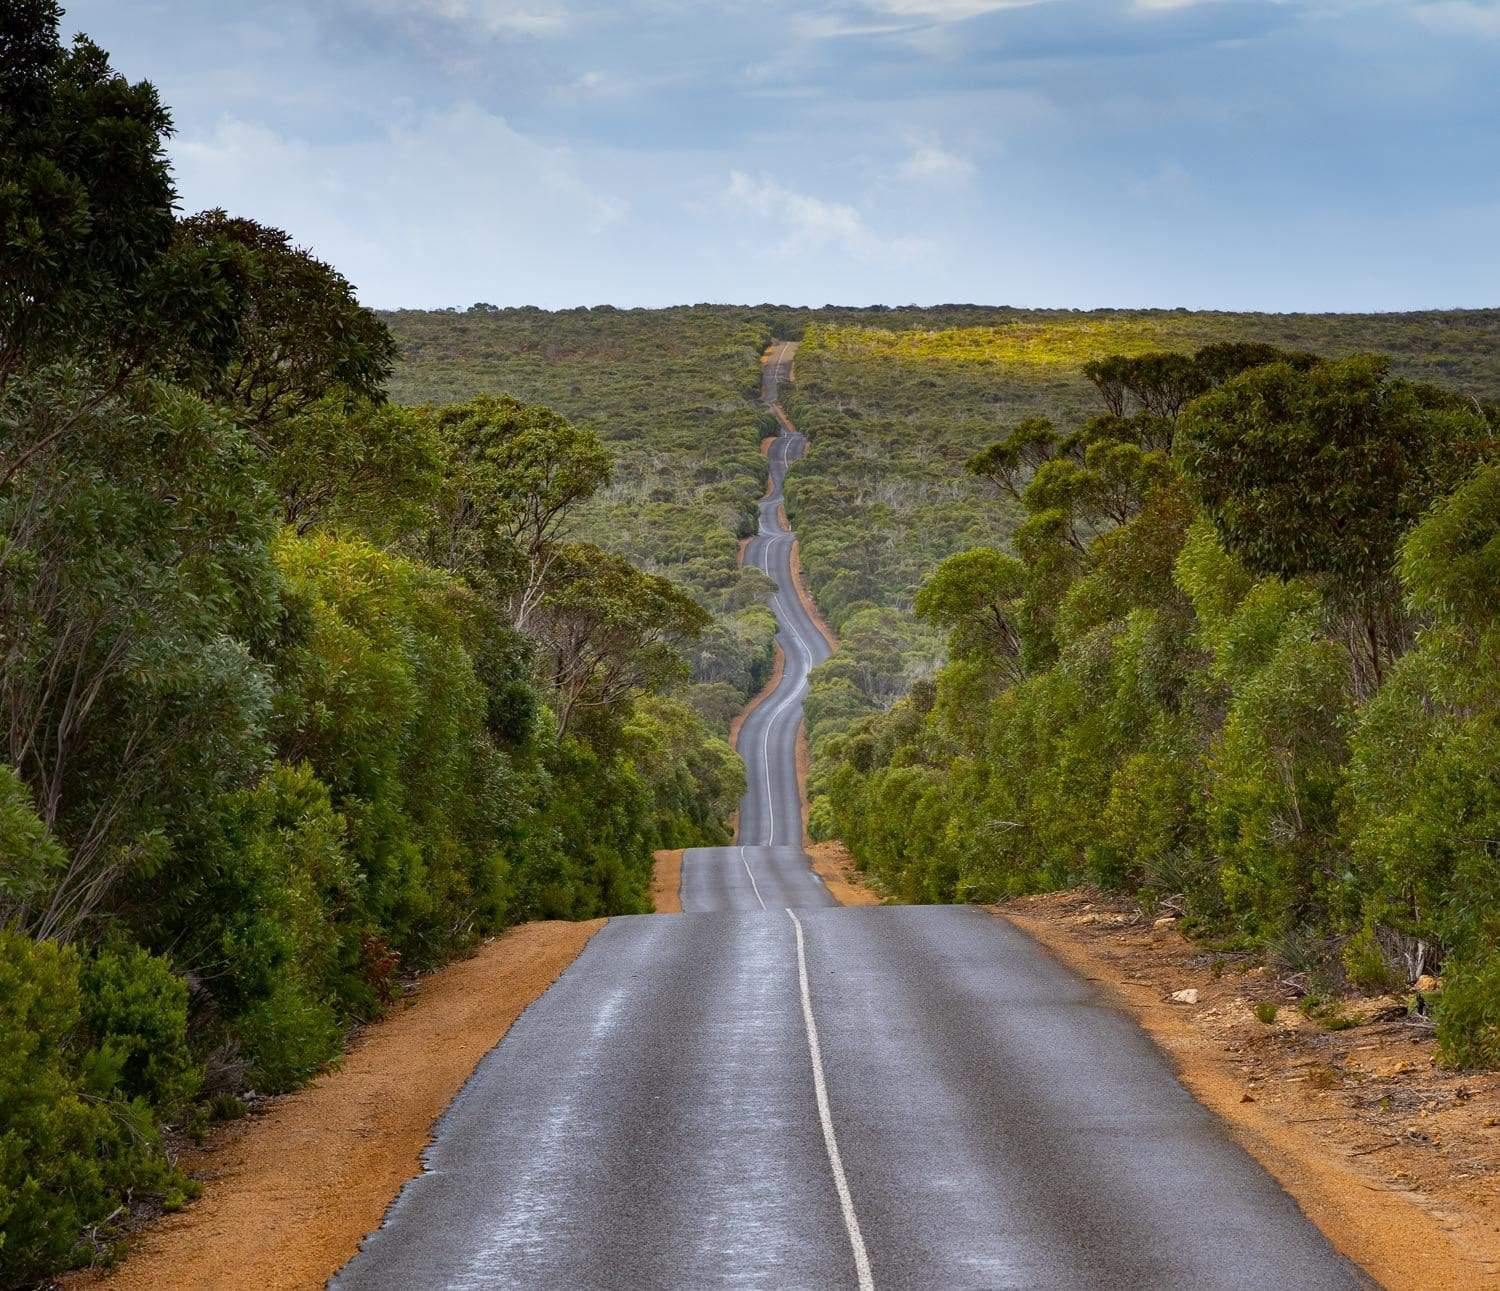 A long road with ups and downs between a thick forest, Windy Road, Kangaroo Island, South Australia